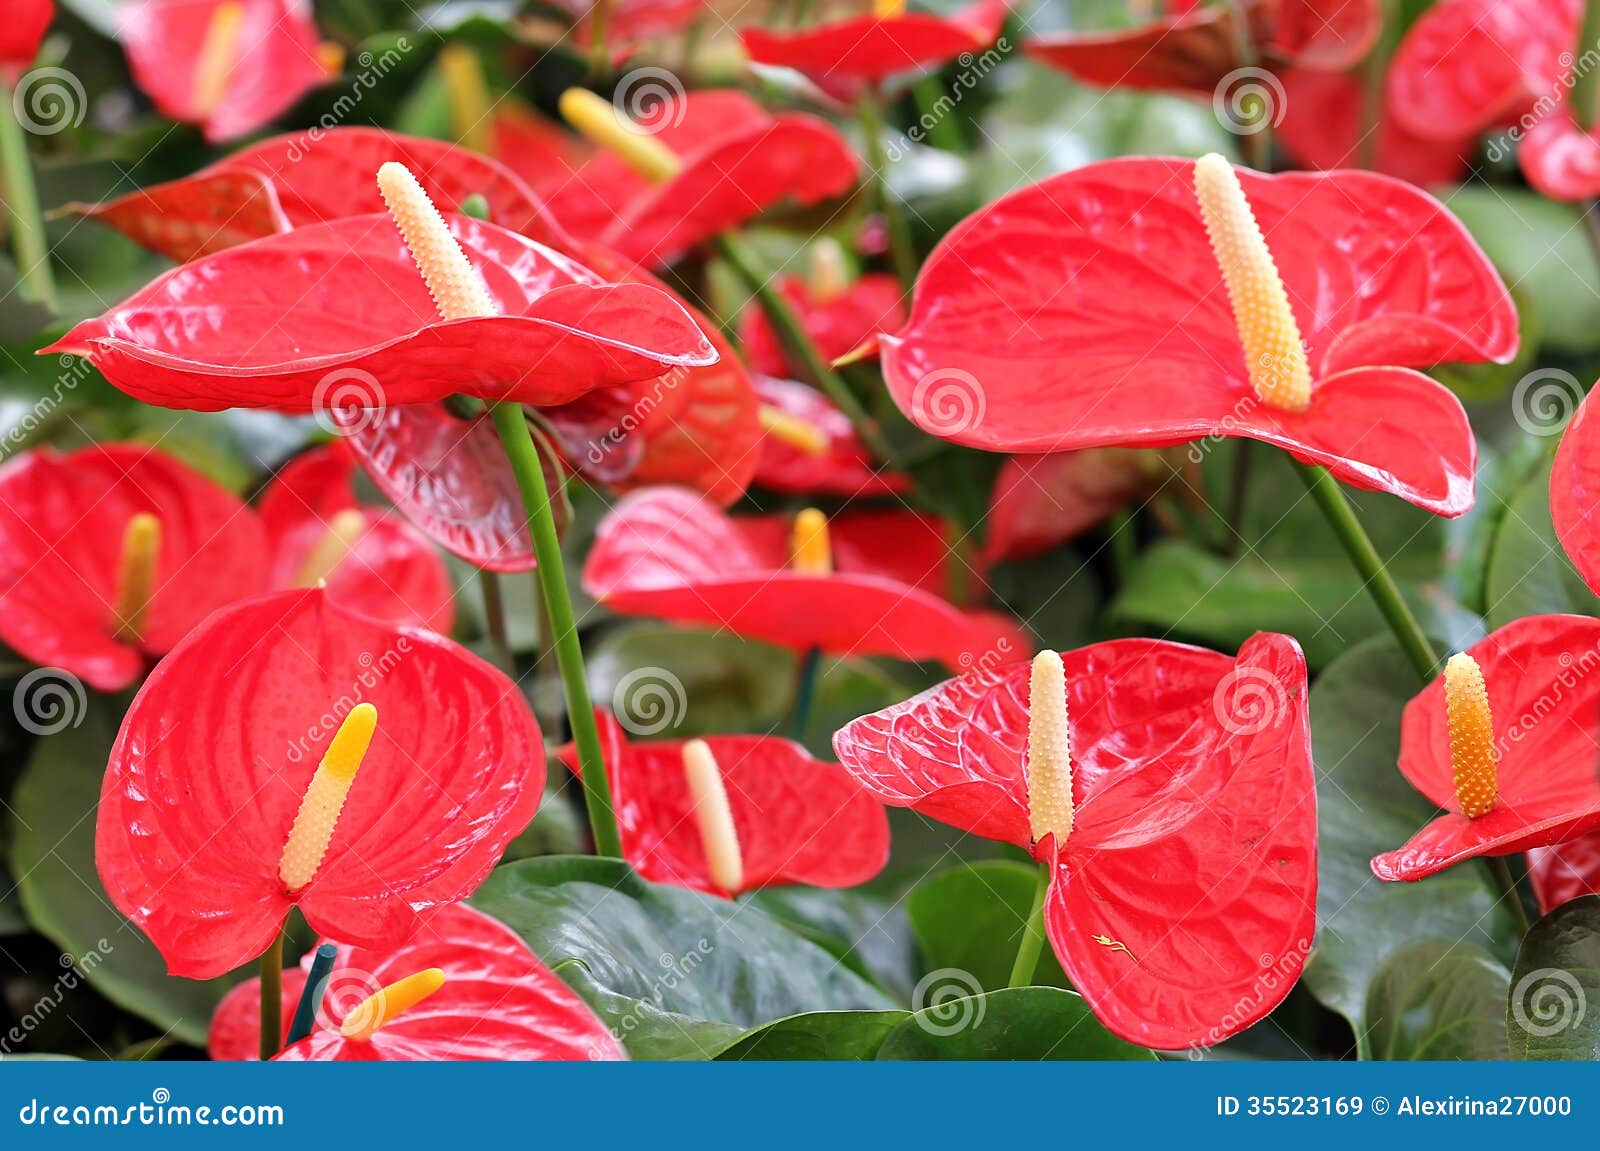 colorful-red-anthurium-close-up-flower-closeup-floral-background-as-wallpapers-35523169.jpg